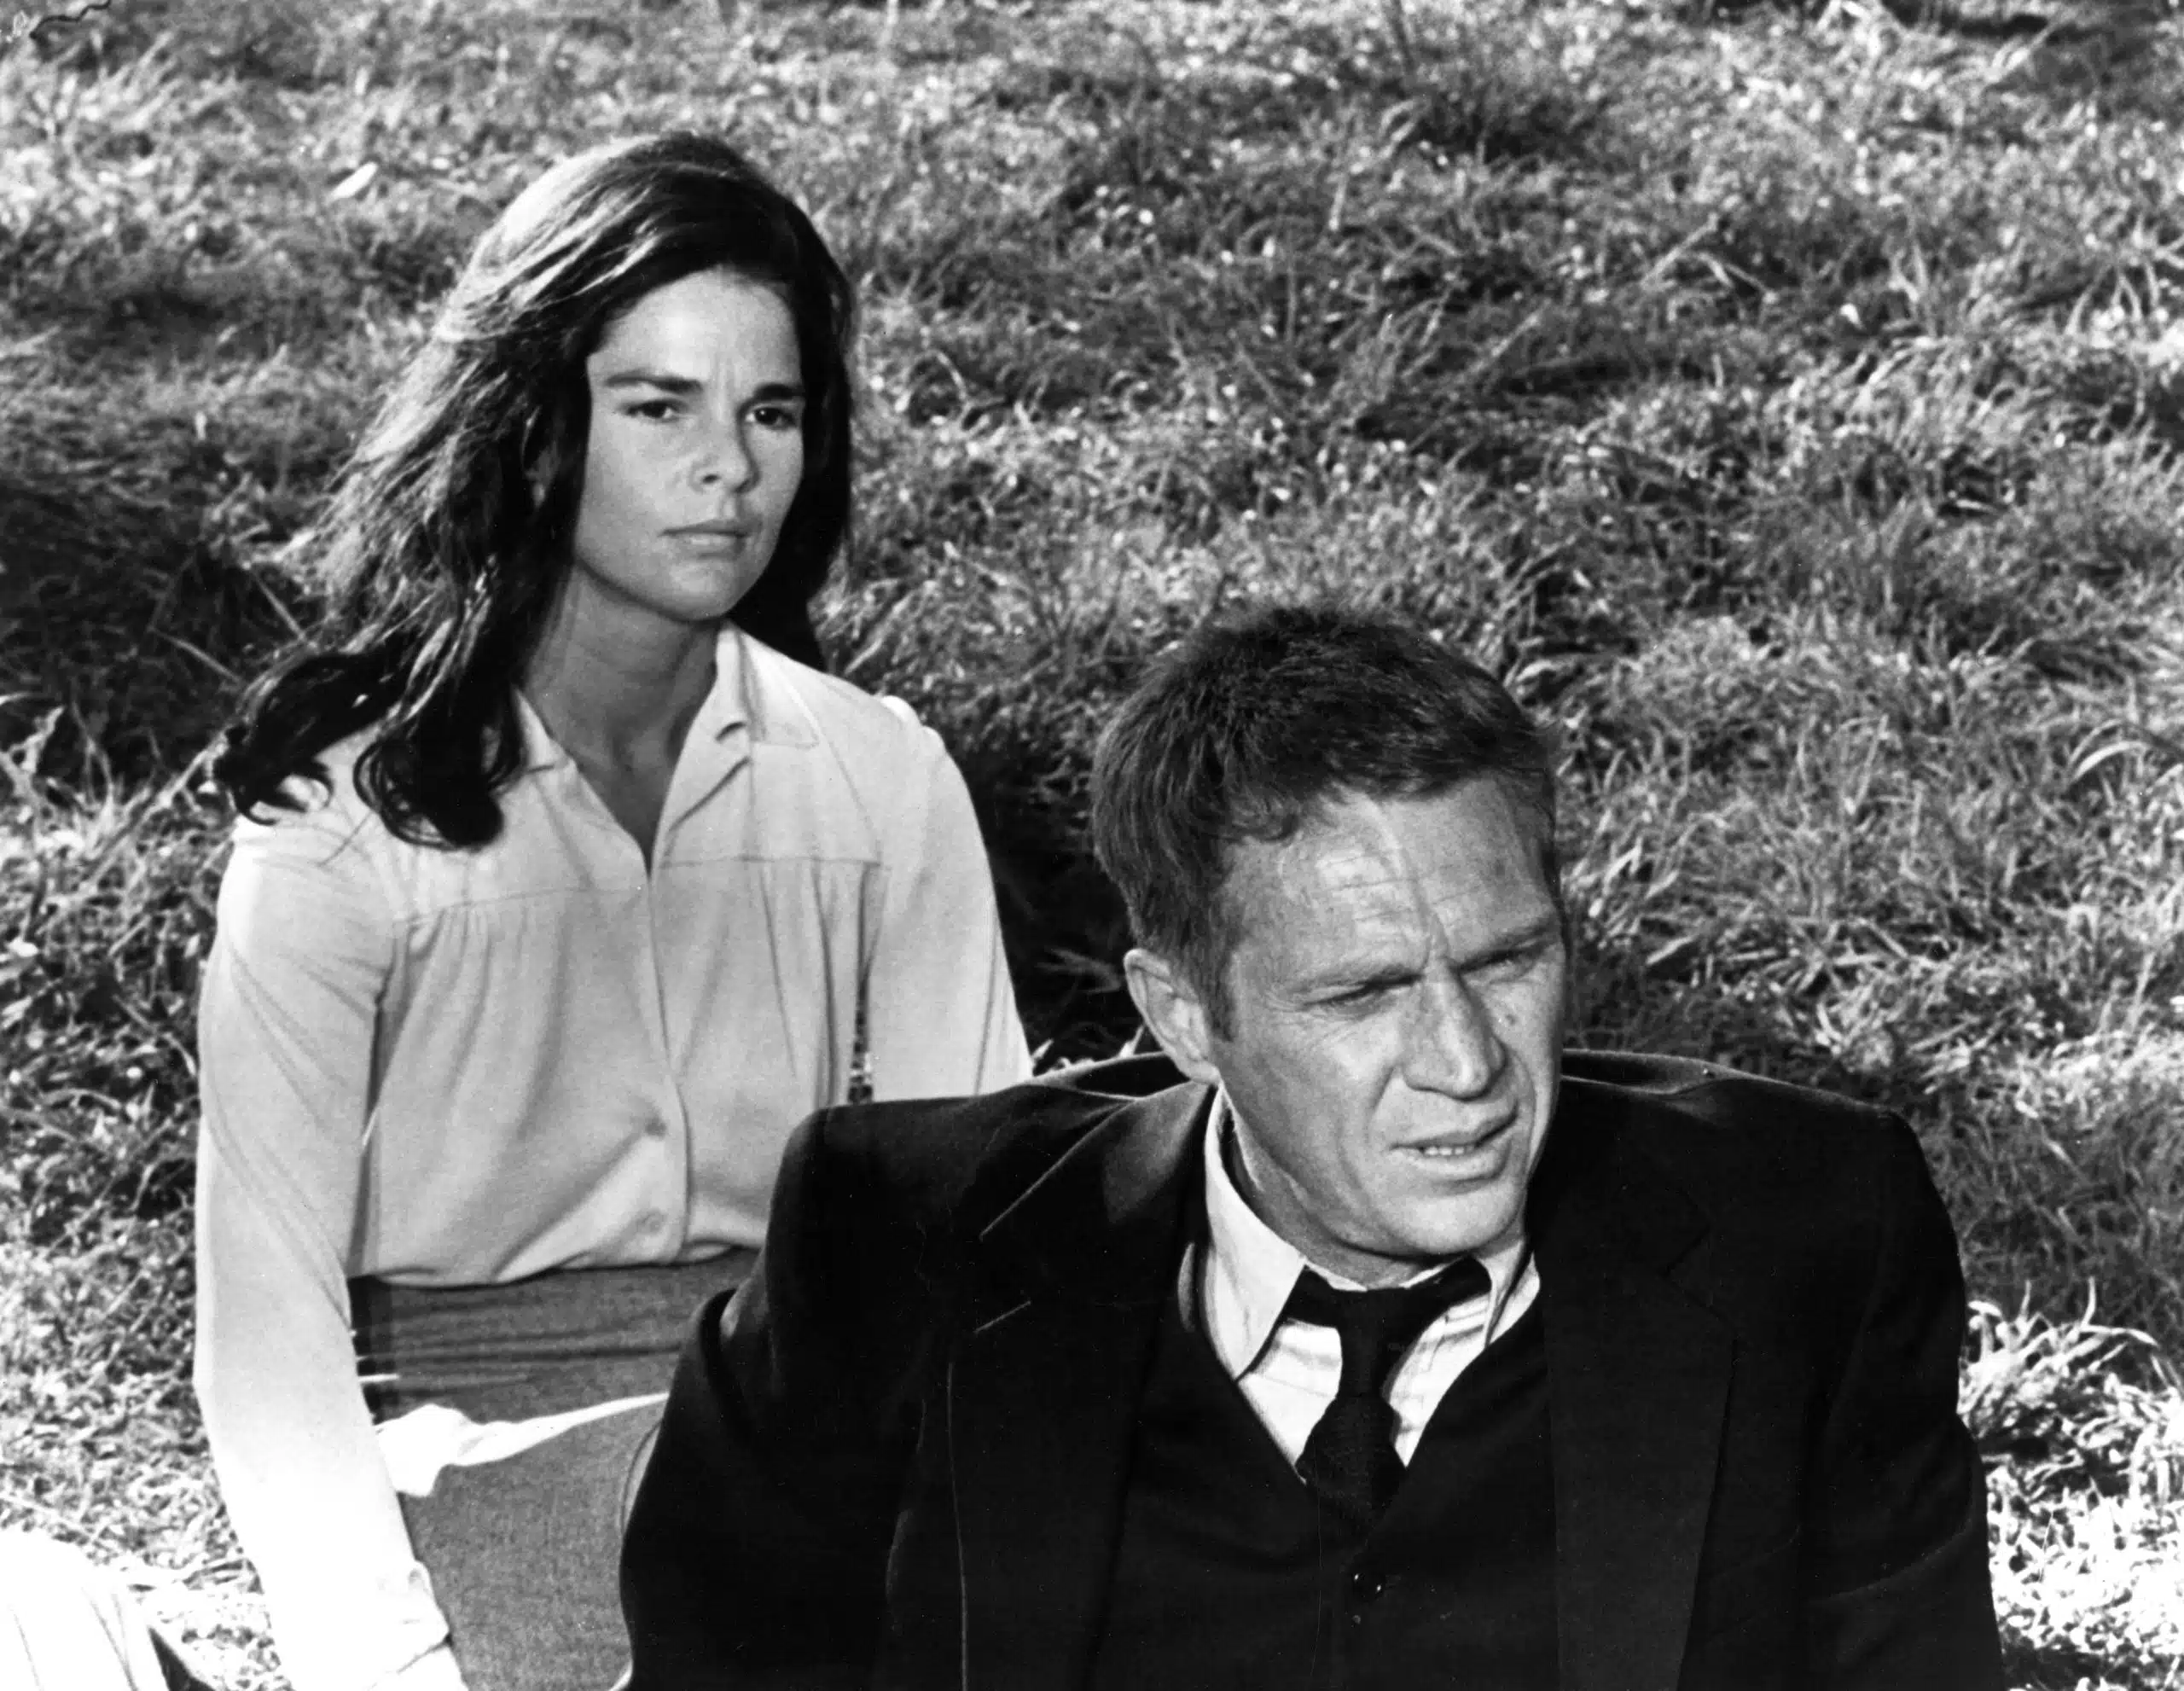 Ali MacGraw relationship with Steve McQueen